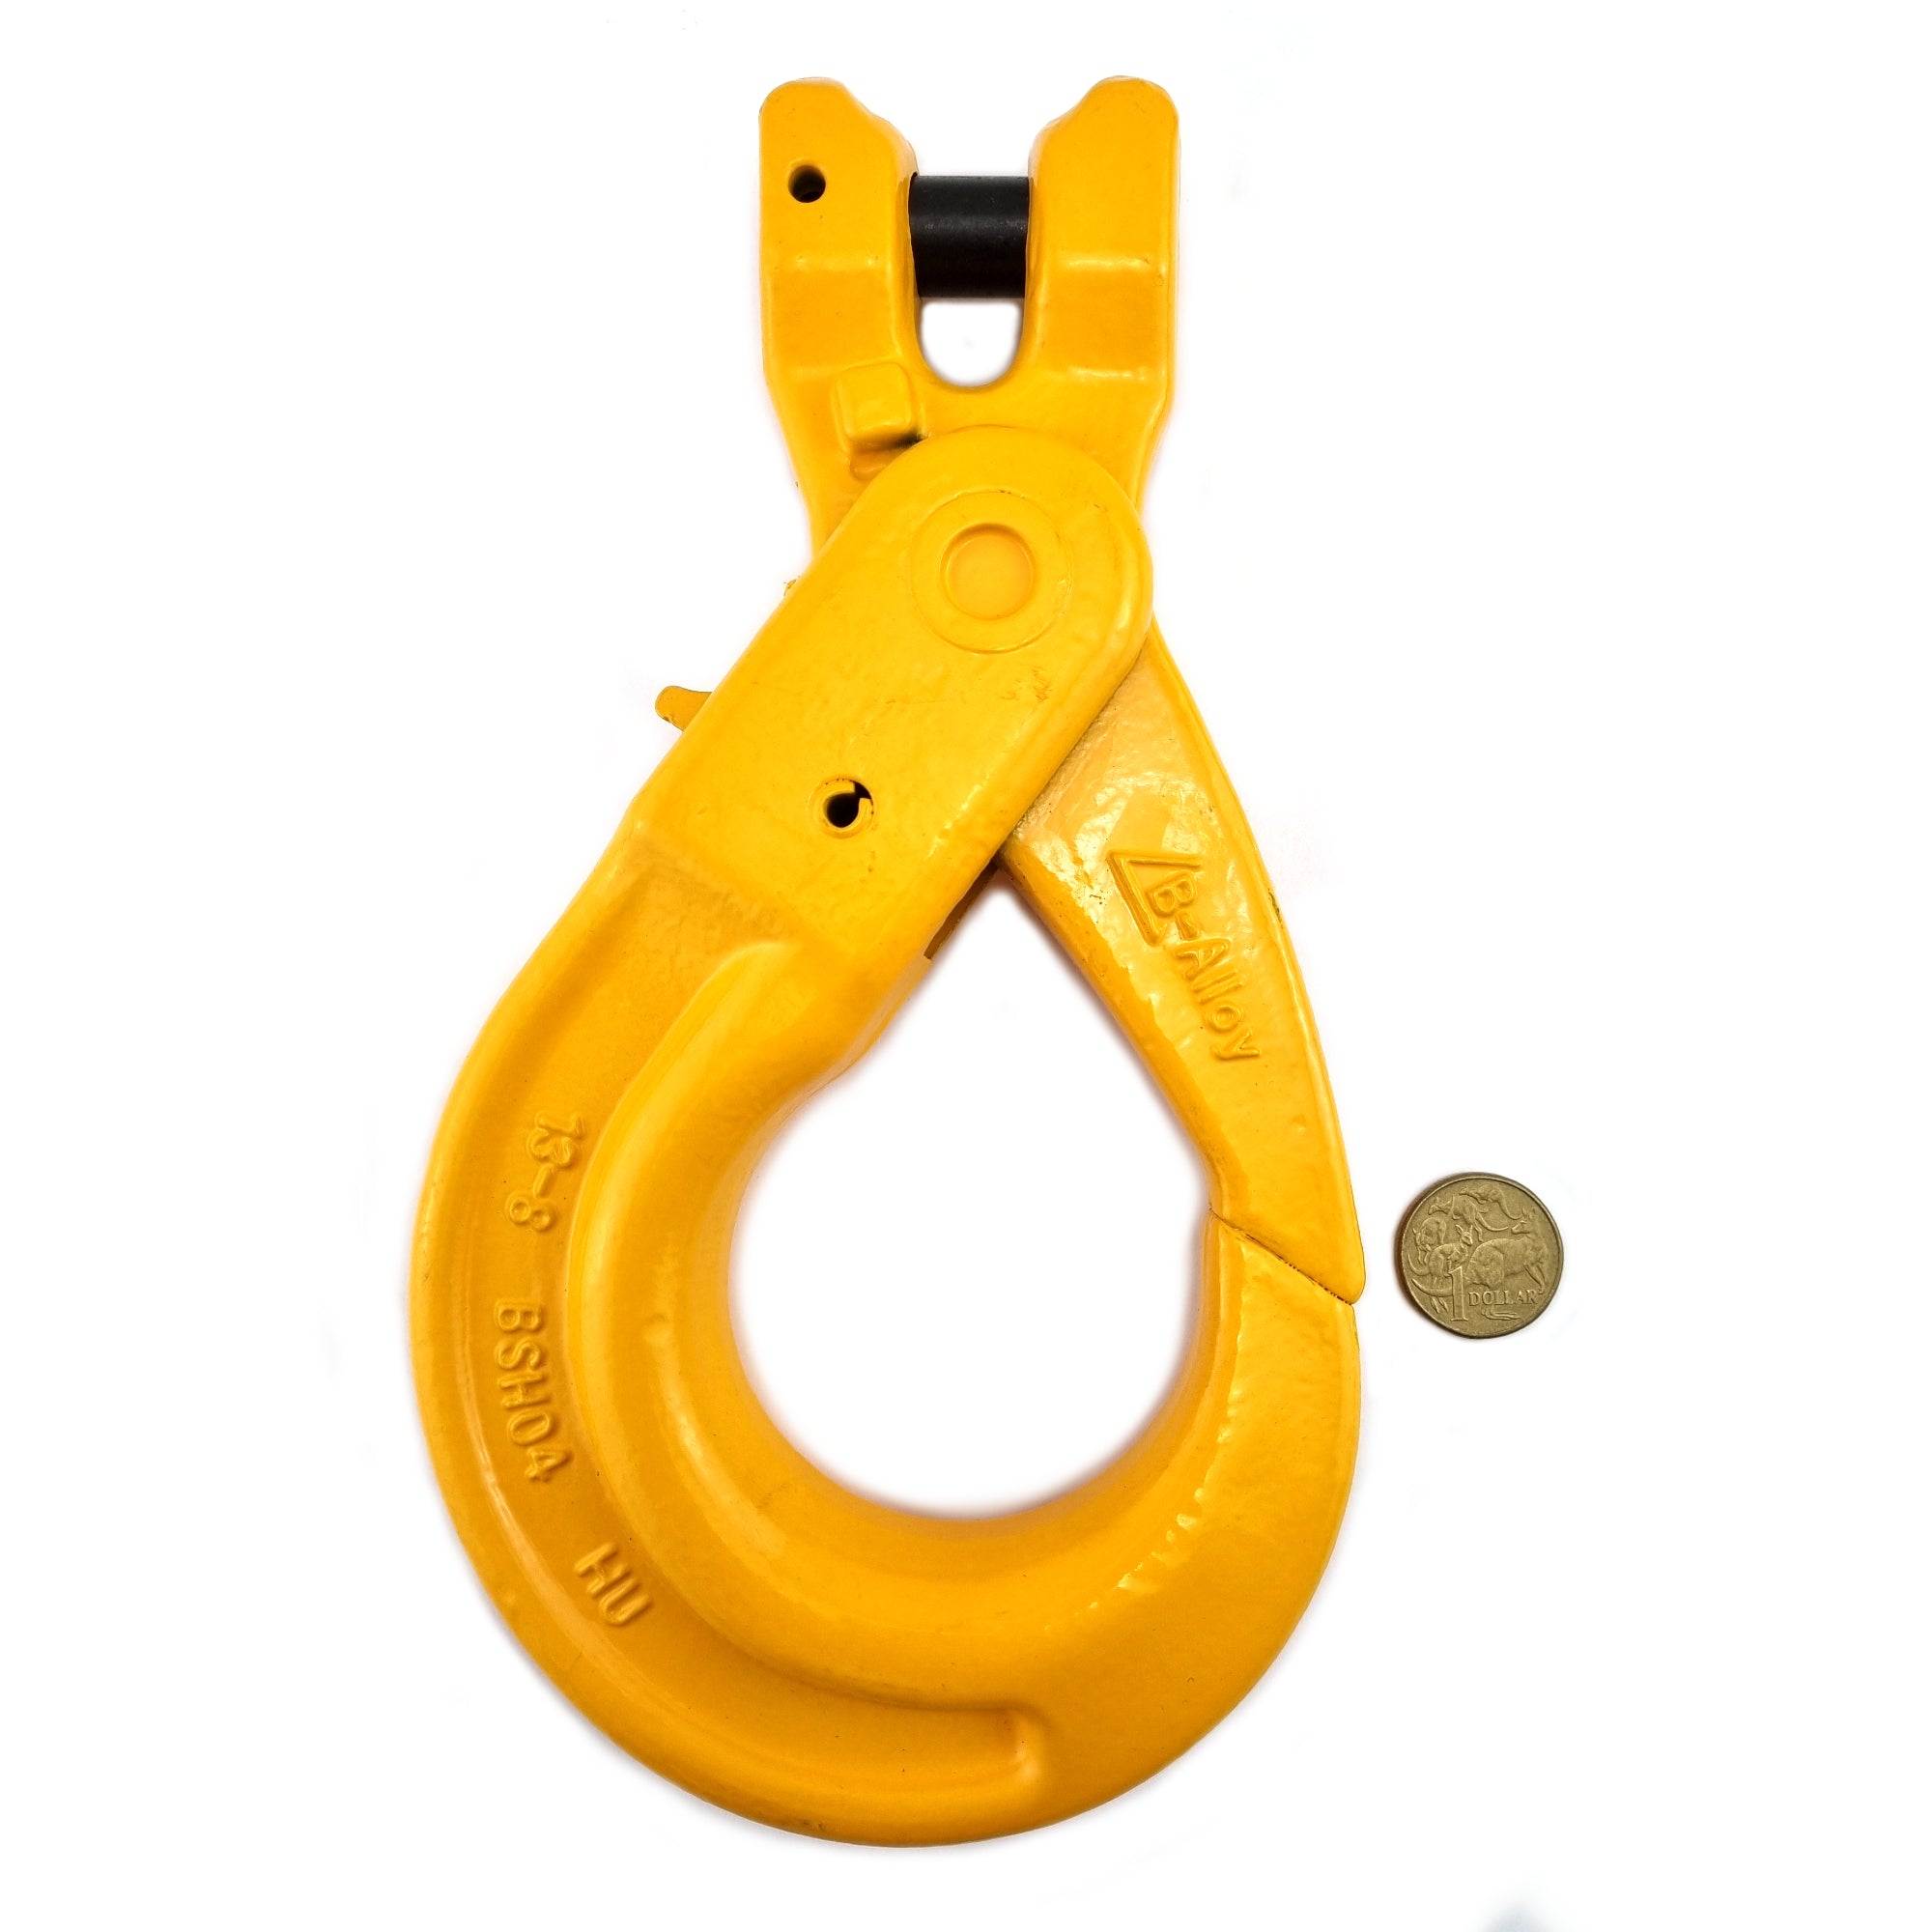 13mm Clevis self locking hook, grade T(80) with 5.4 tonne rating. Shop hooks and hardware online chain.com.au